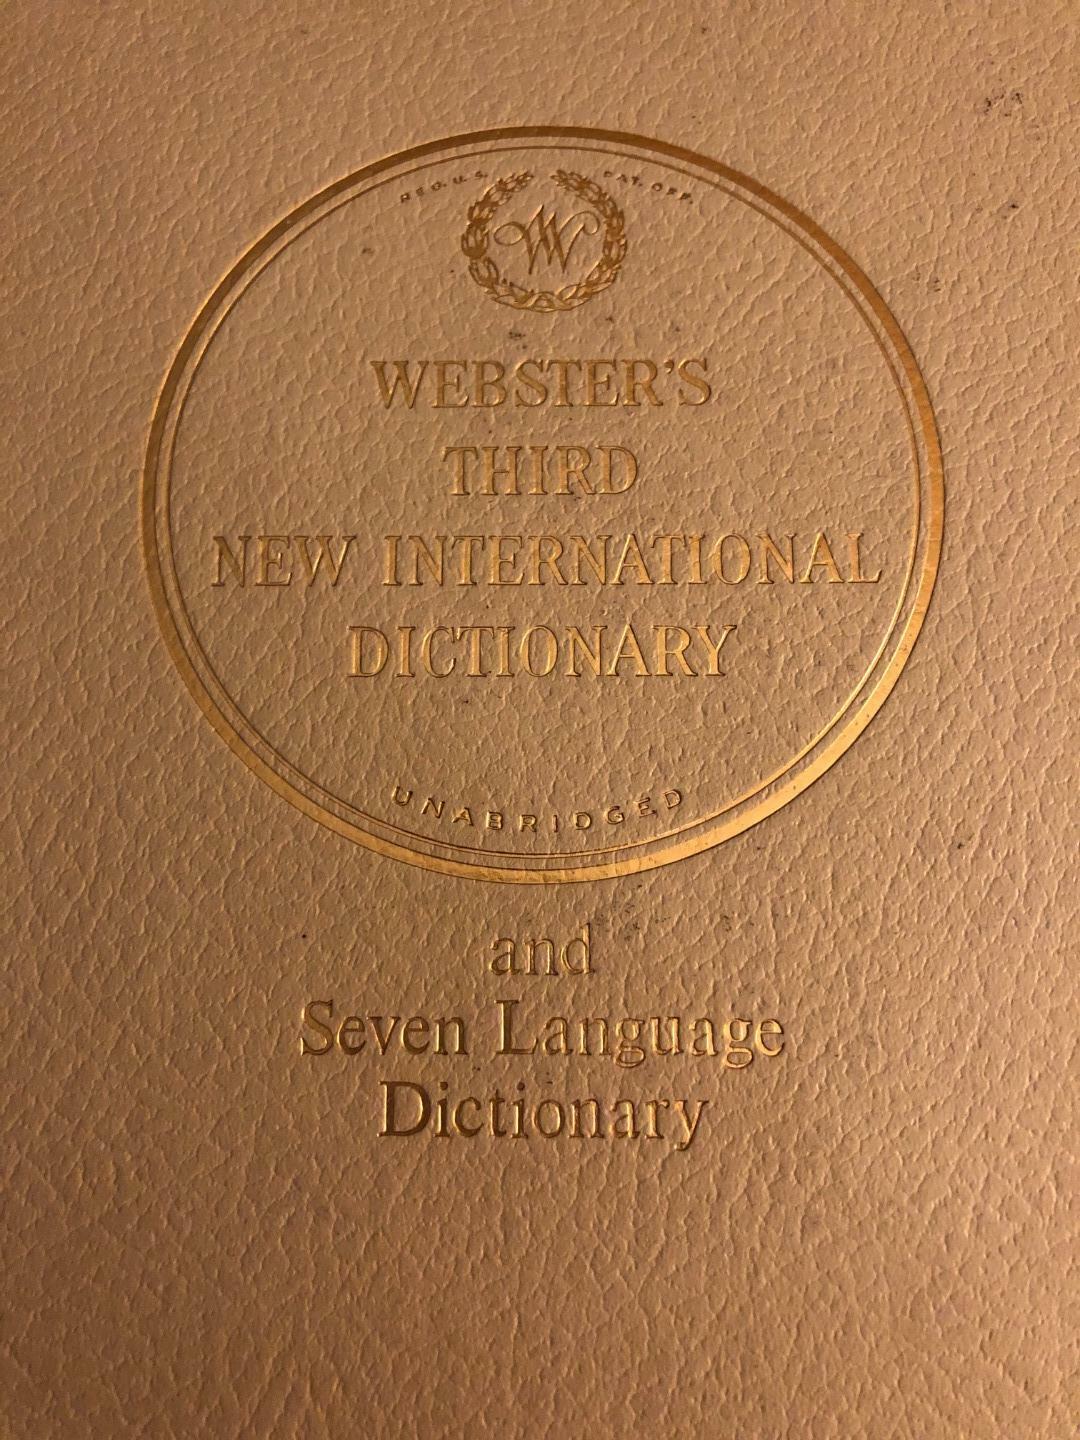 Webster's Third New International Dictionary And Seven Language Dictionary